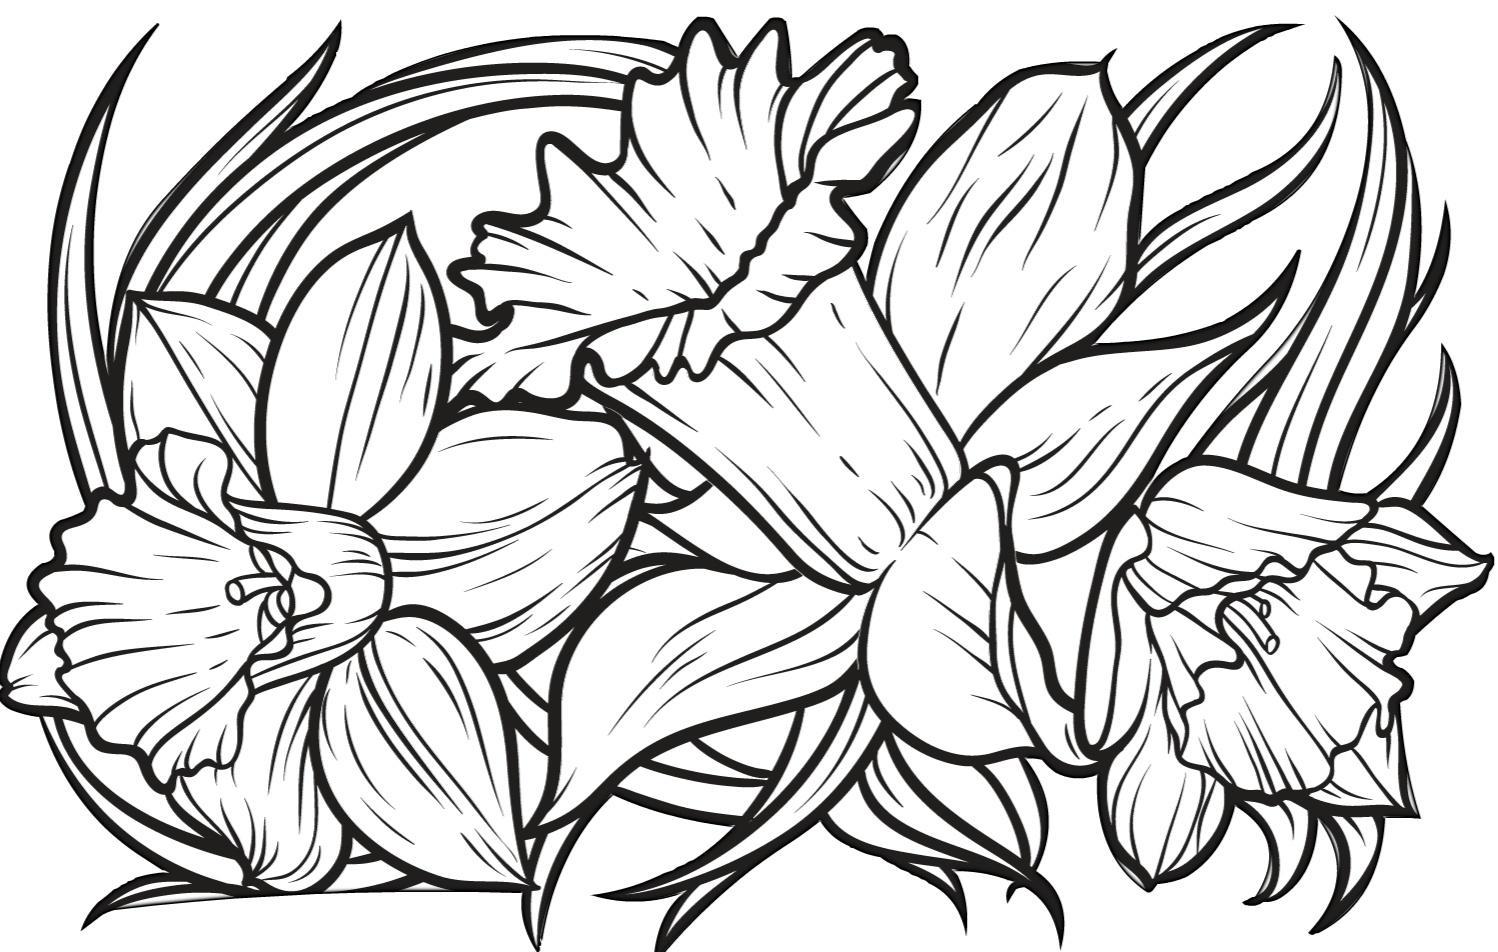 20 Easy Coloring Pages for Seniors in 20   Happier Human